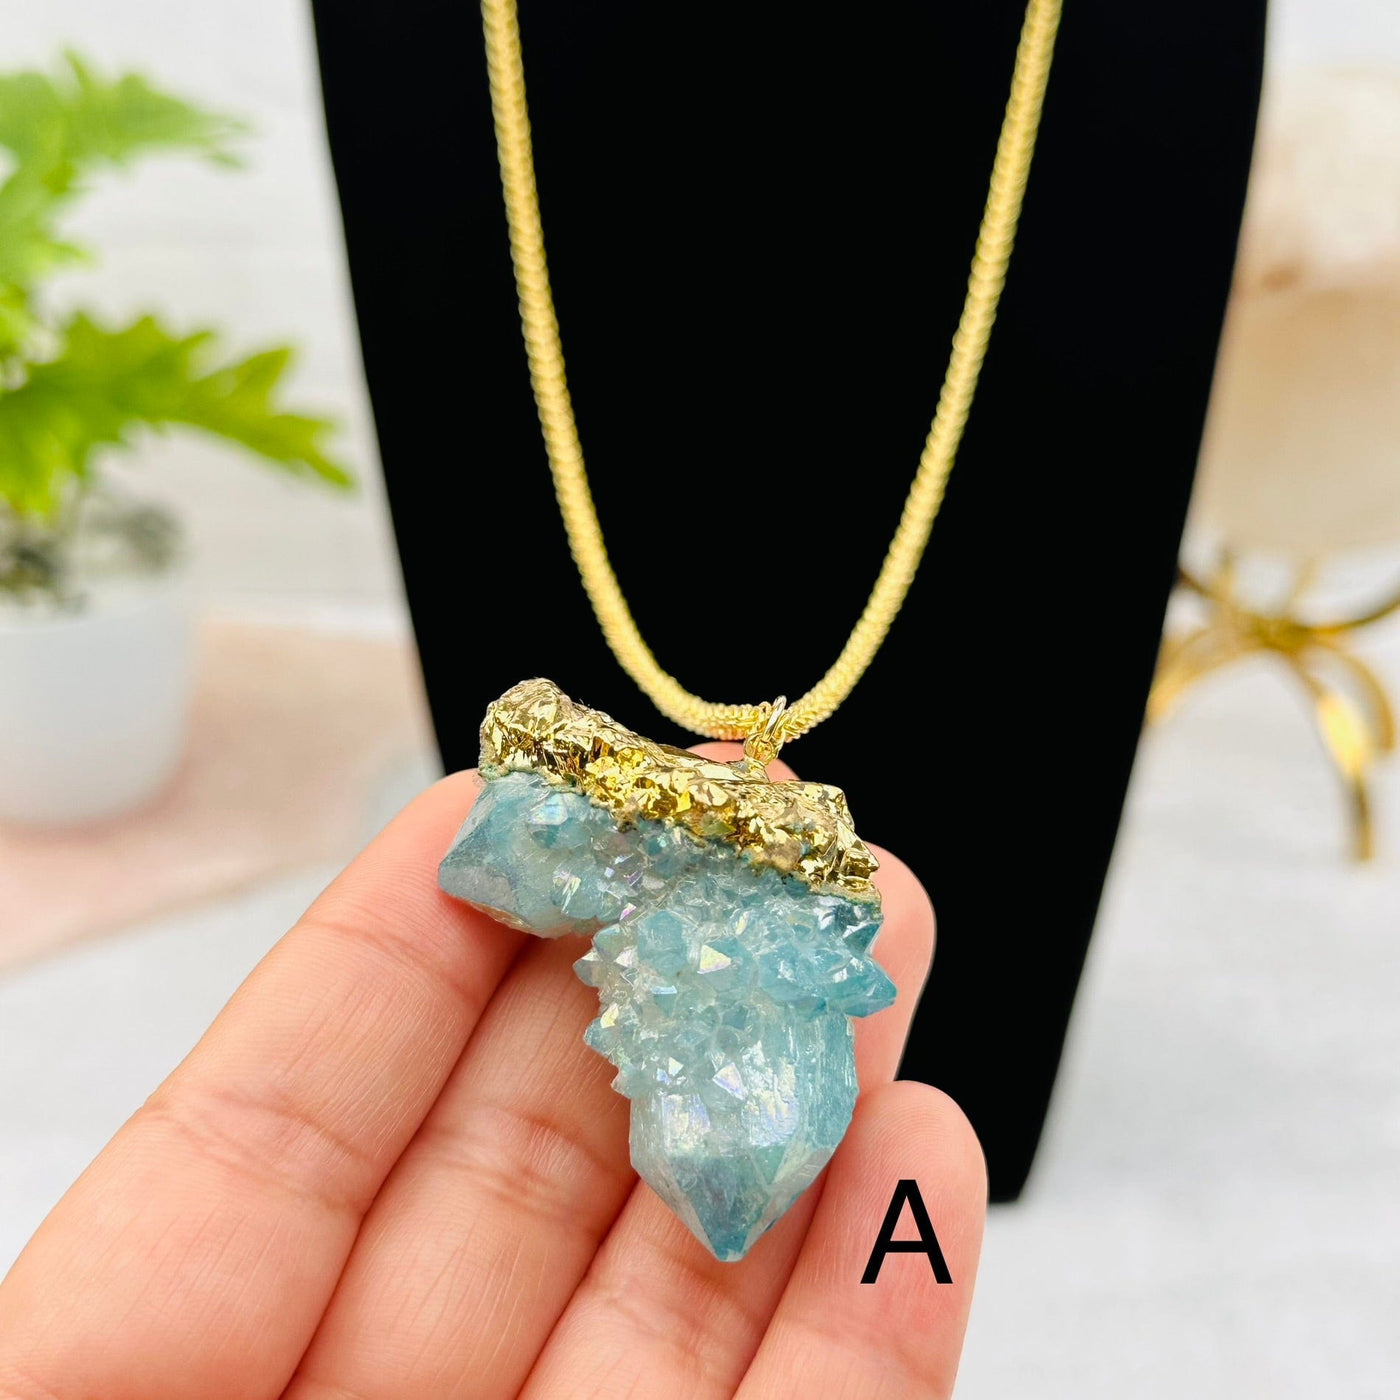 Aqua Aura Cactus Quartz Necklace in hand for size reference  - You Choose -